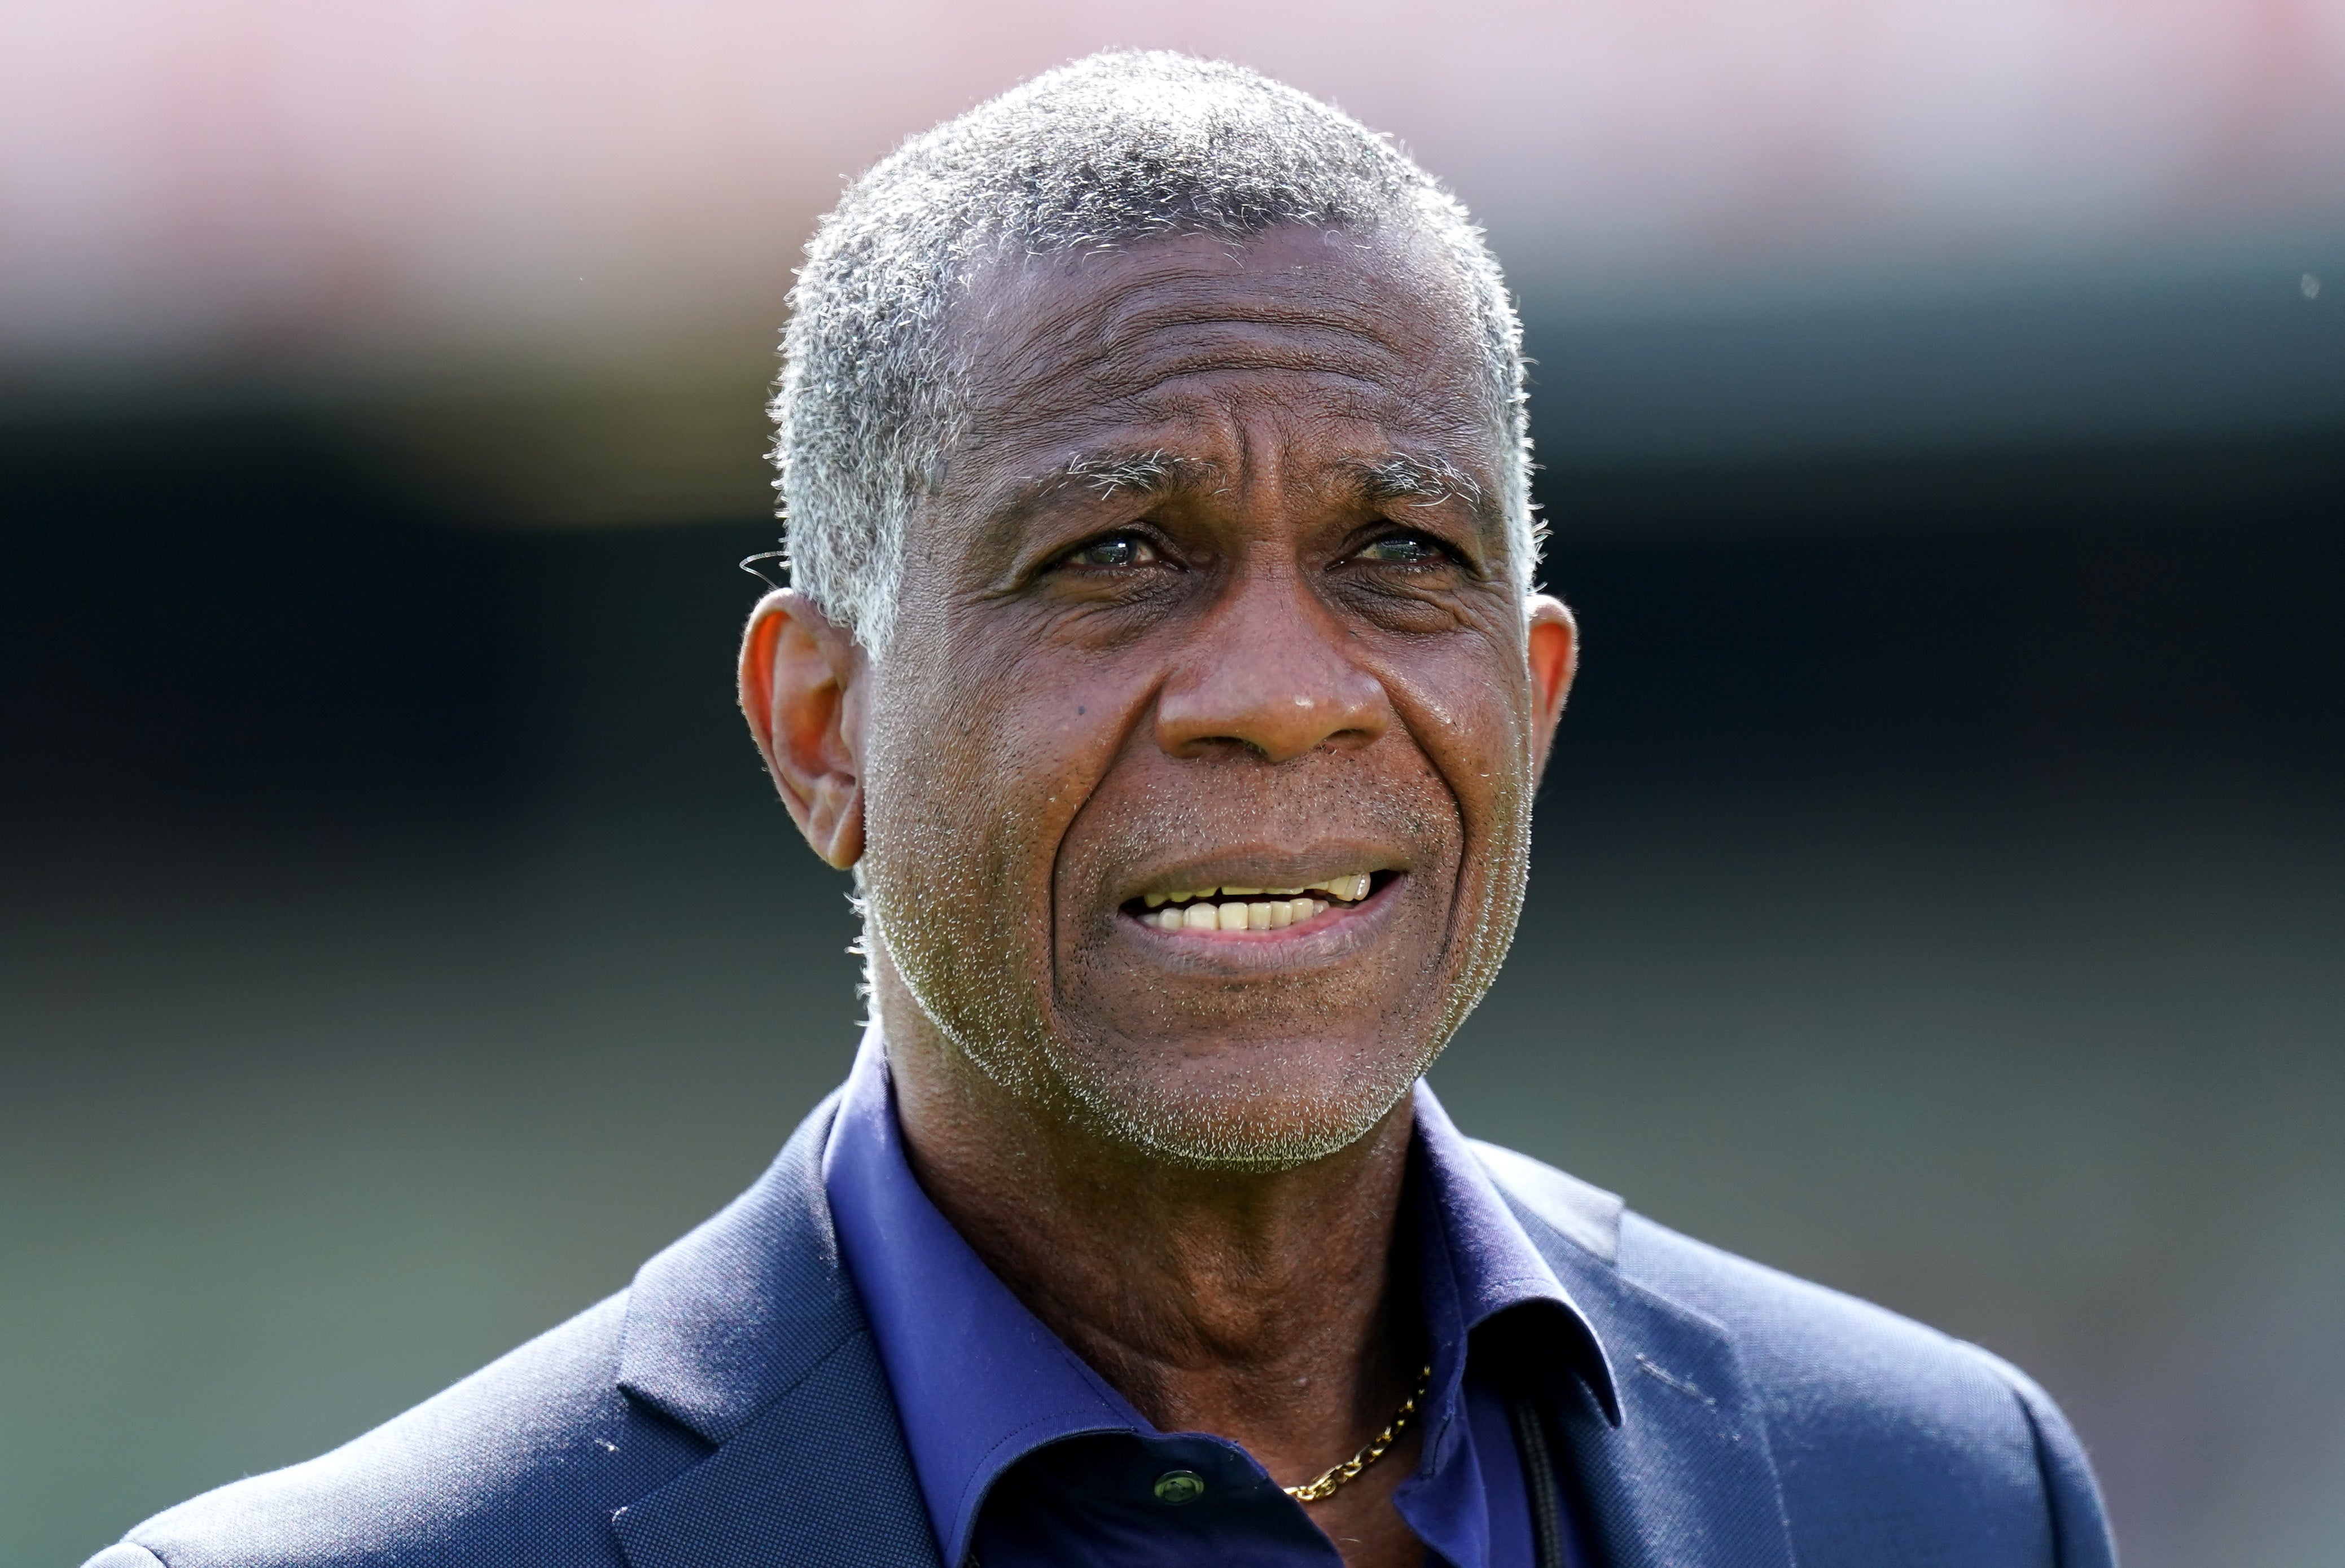 Former West Indies pace bowler Michael Holding has applauded the England football players and manager Gareth Southgate